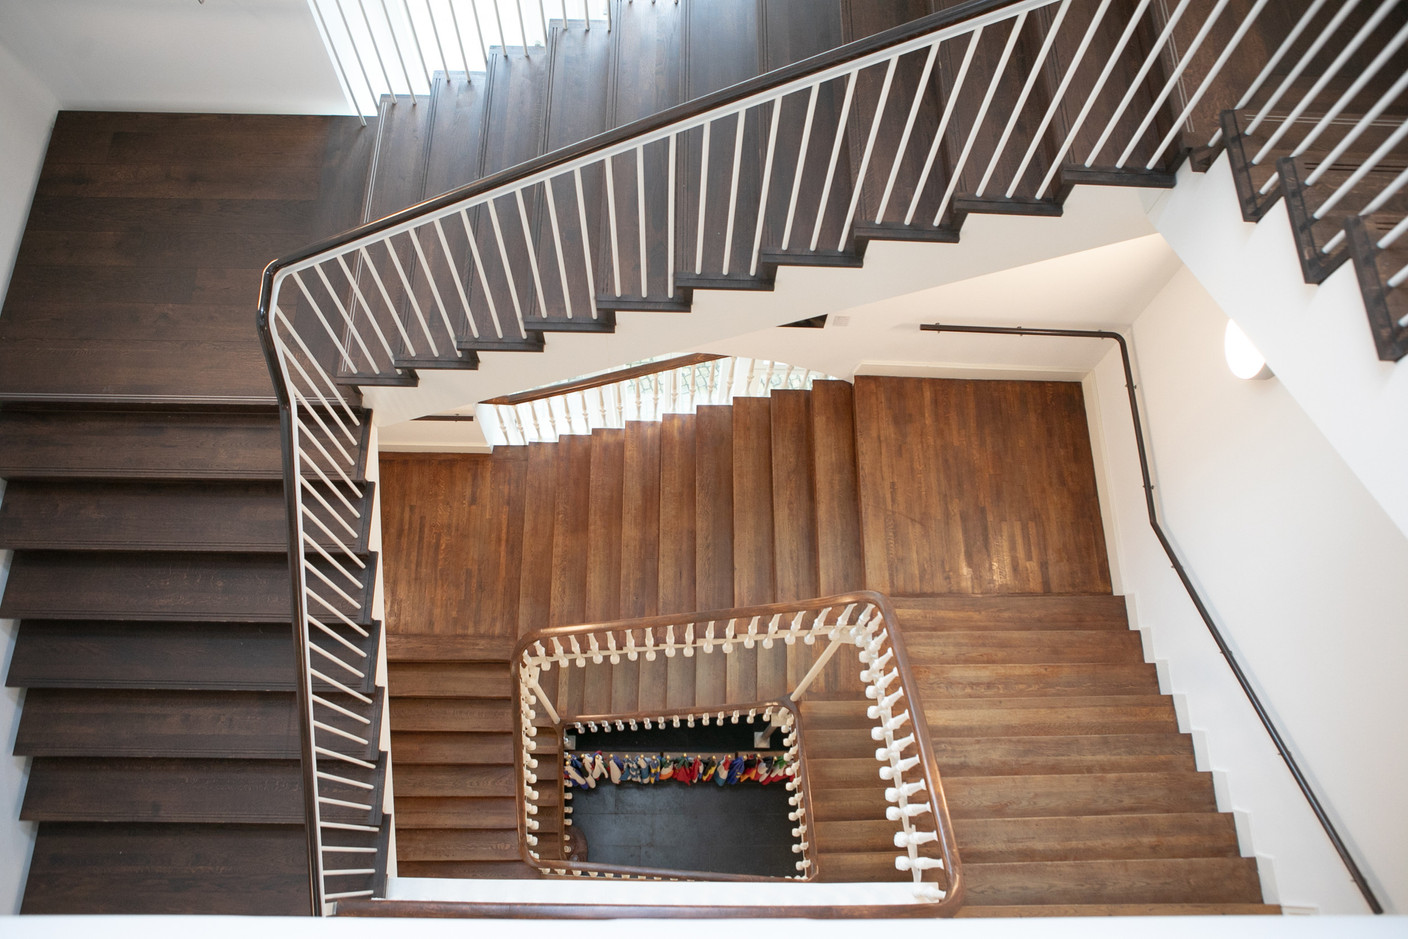 The building’s grand staircase Matic Zorman / Maison Moderne